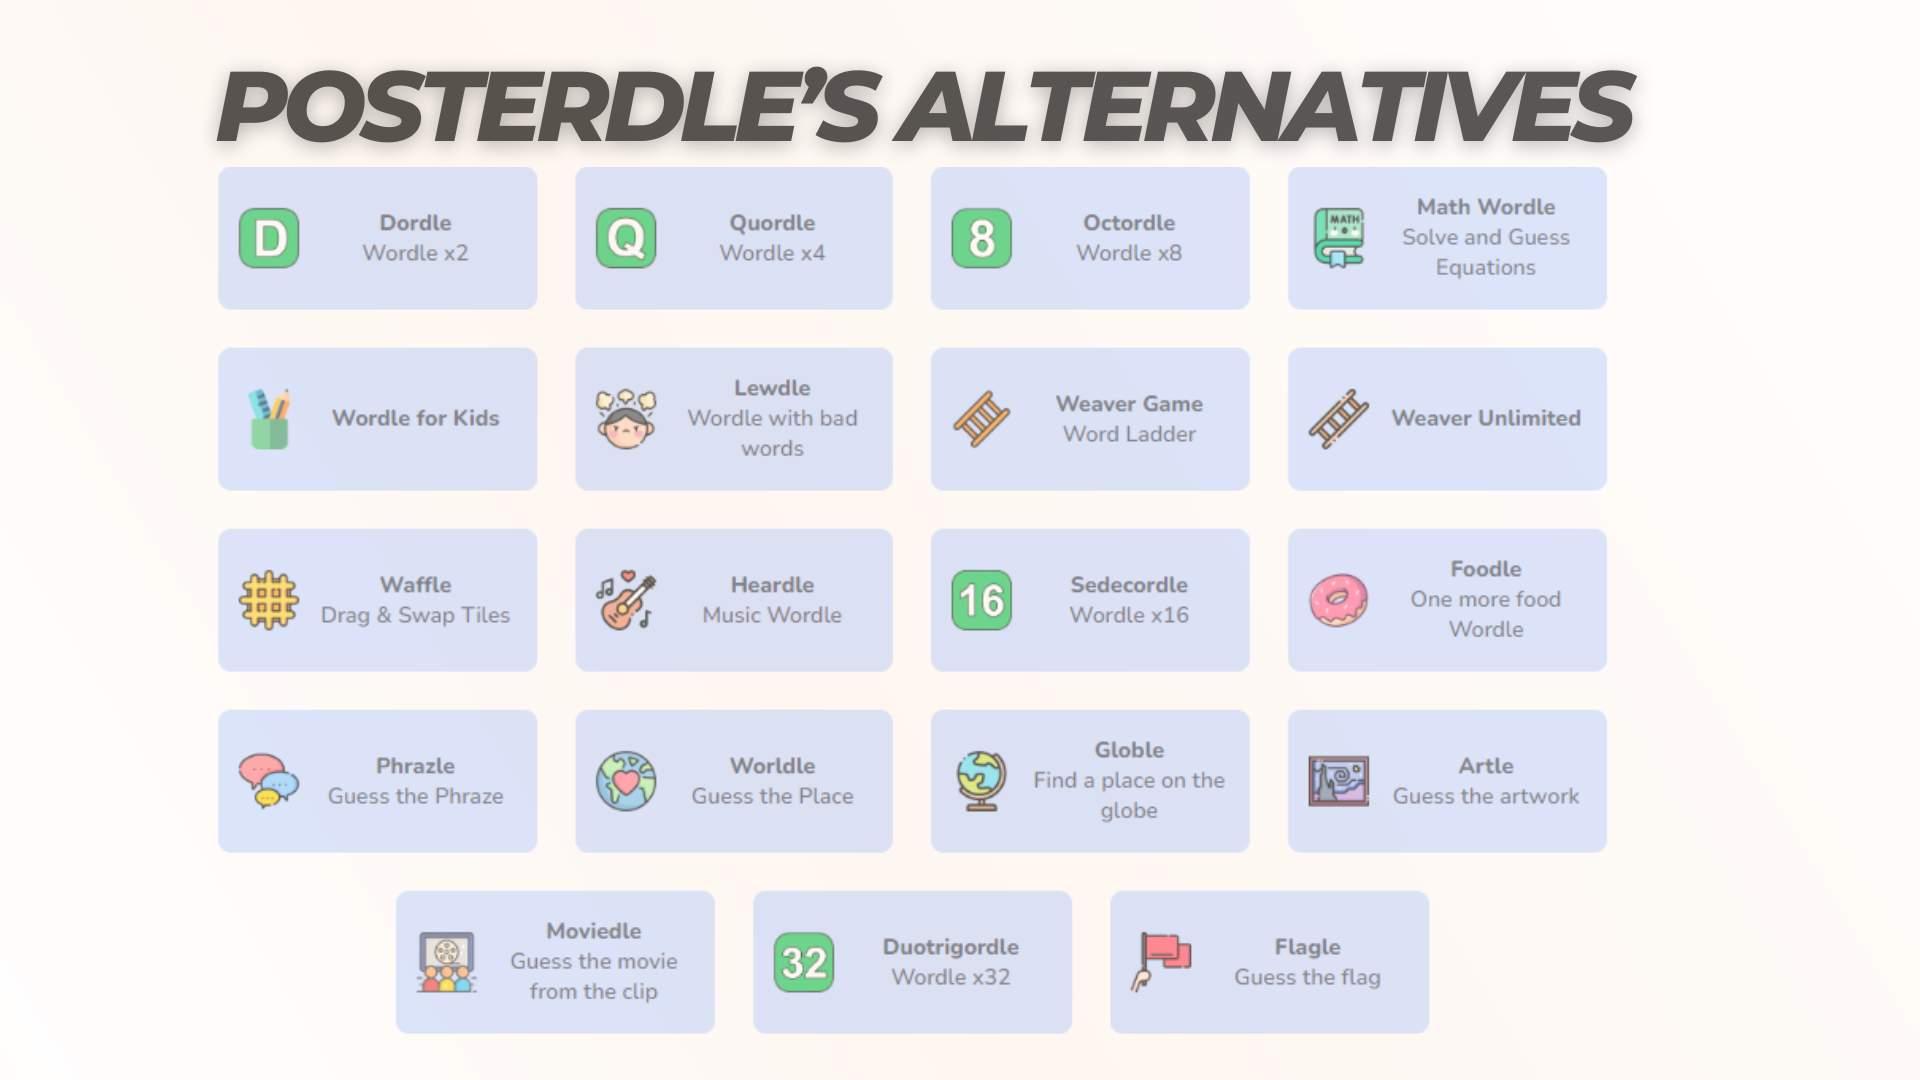 List of some Posterdle’s Alternatives: